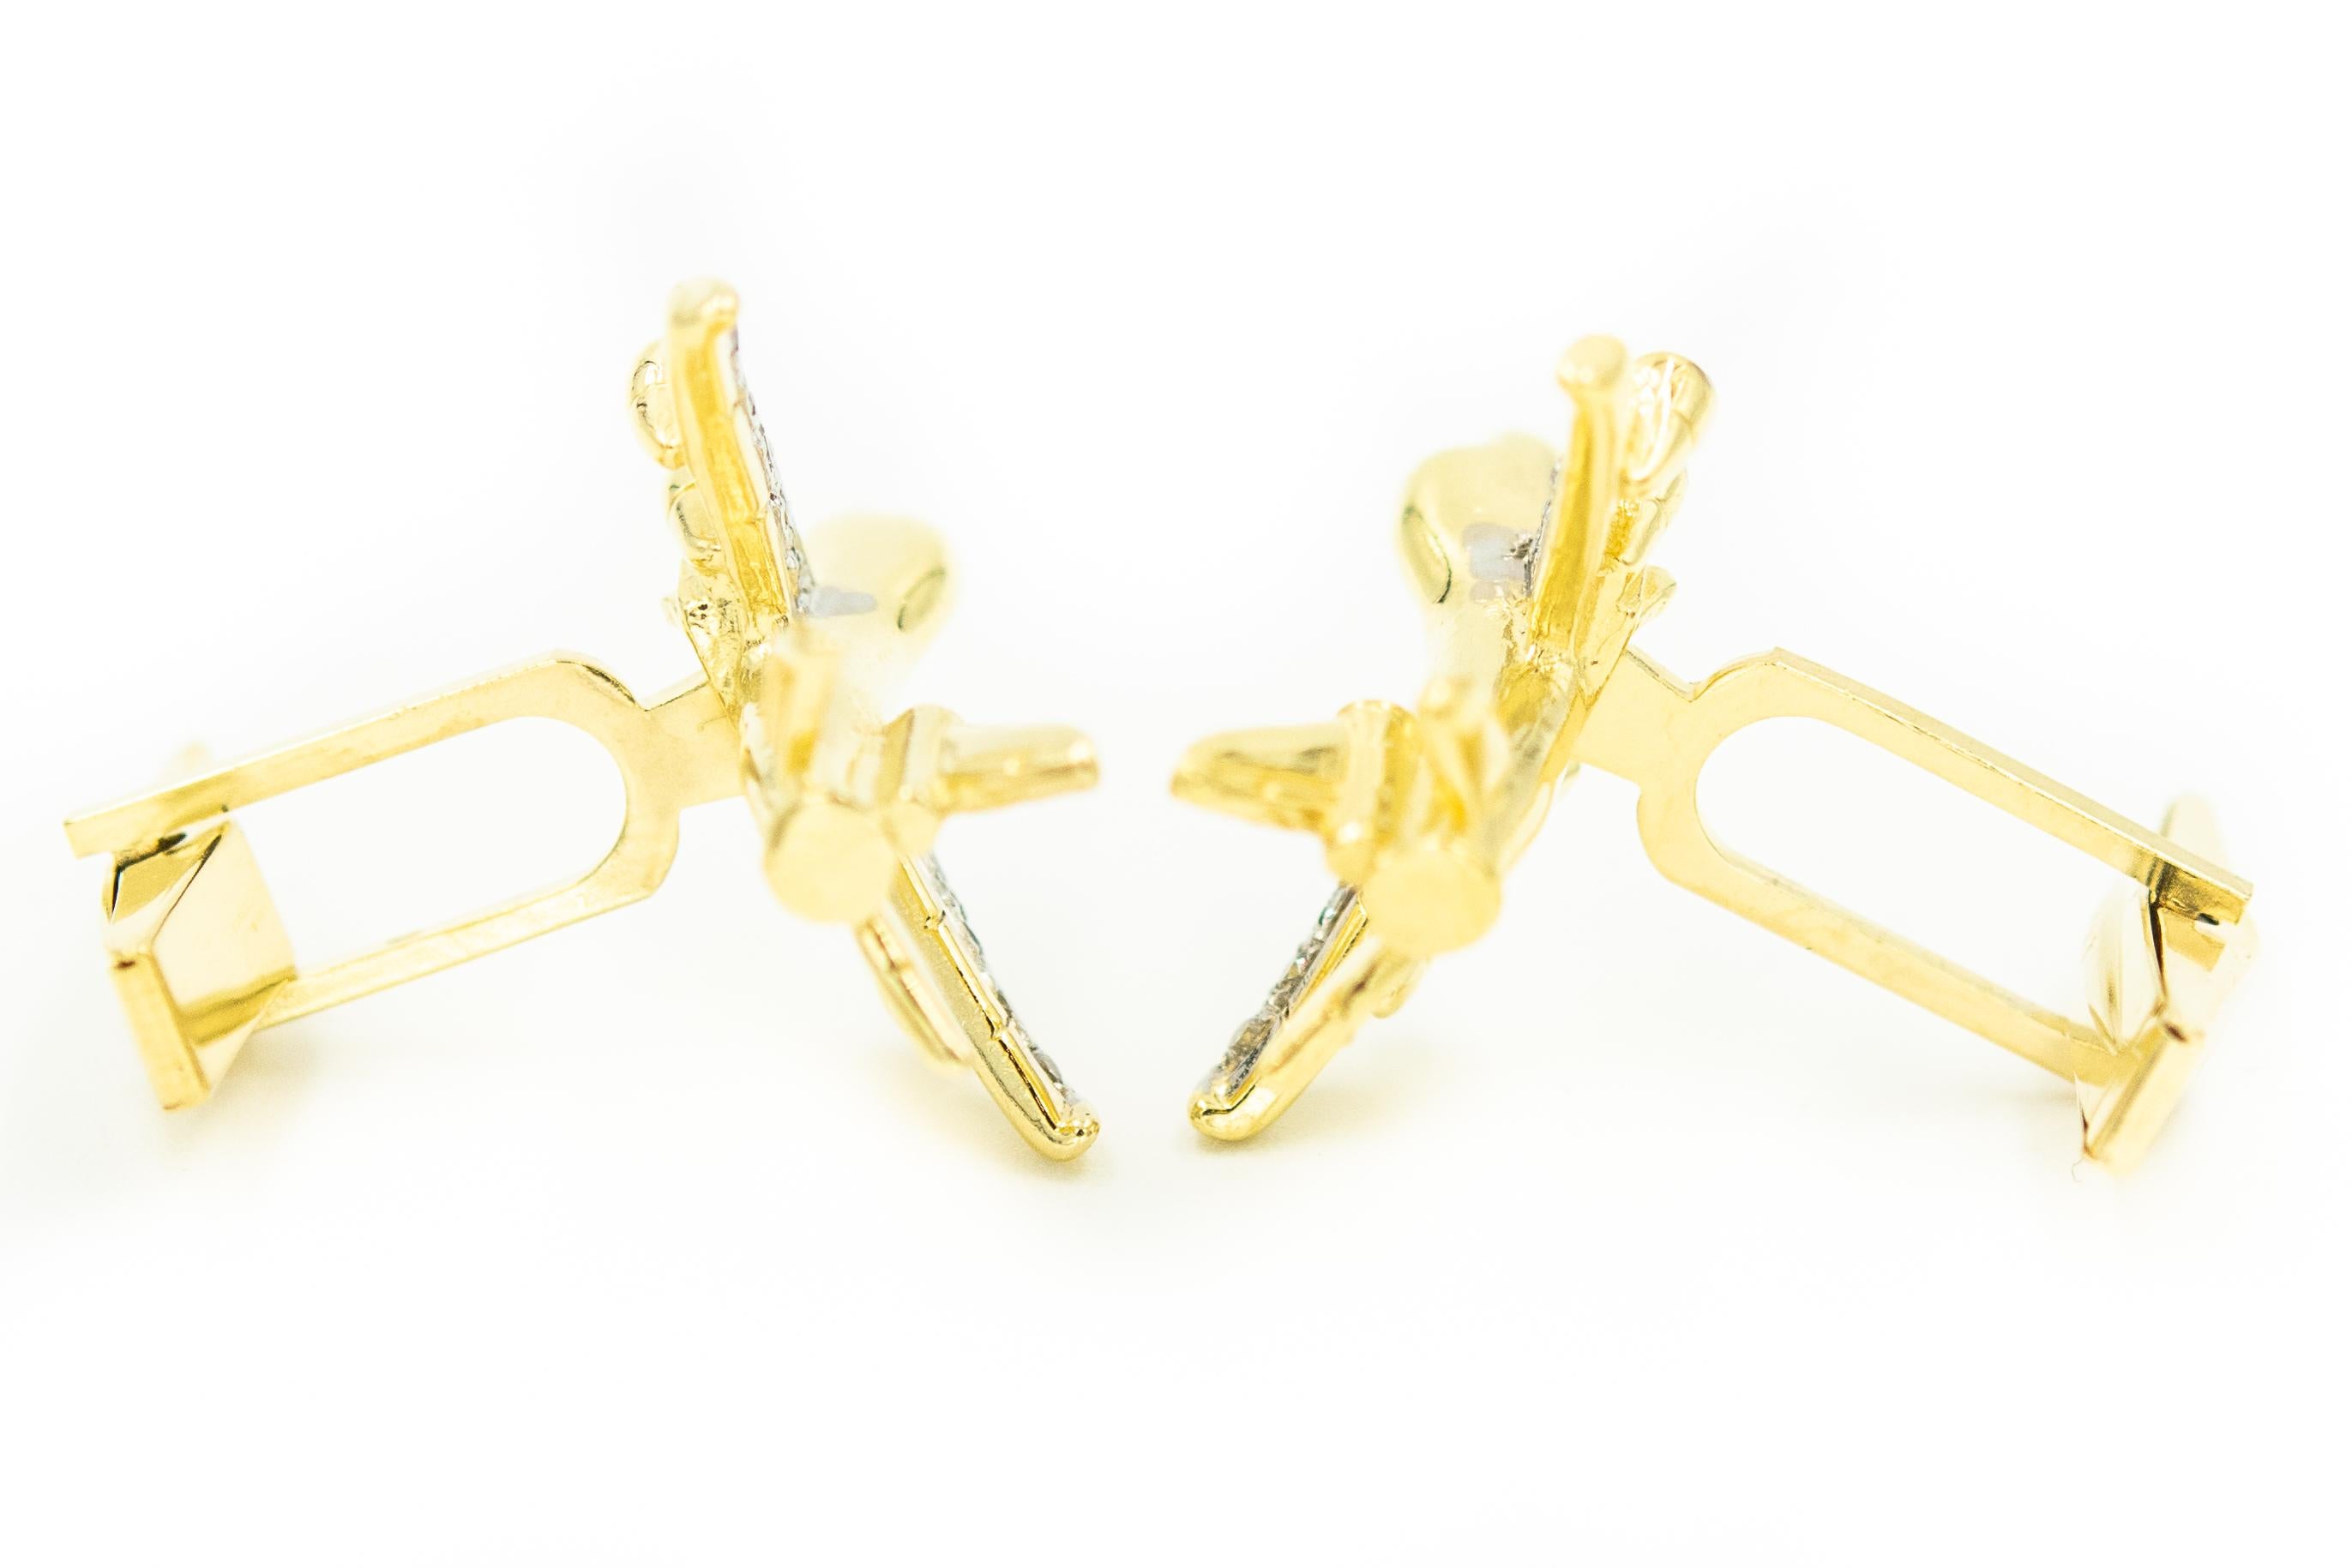 Wonderful figural 14k yellow gold airplane cufflinks featuring diamond accented wings and lights.  They have a whale t-bar closure to make it easy to put on.  A great gift for a pilot, traveler or airplane enthusiast.